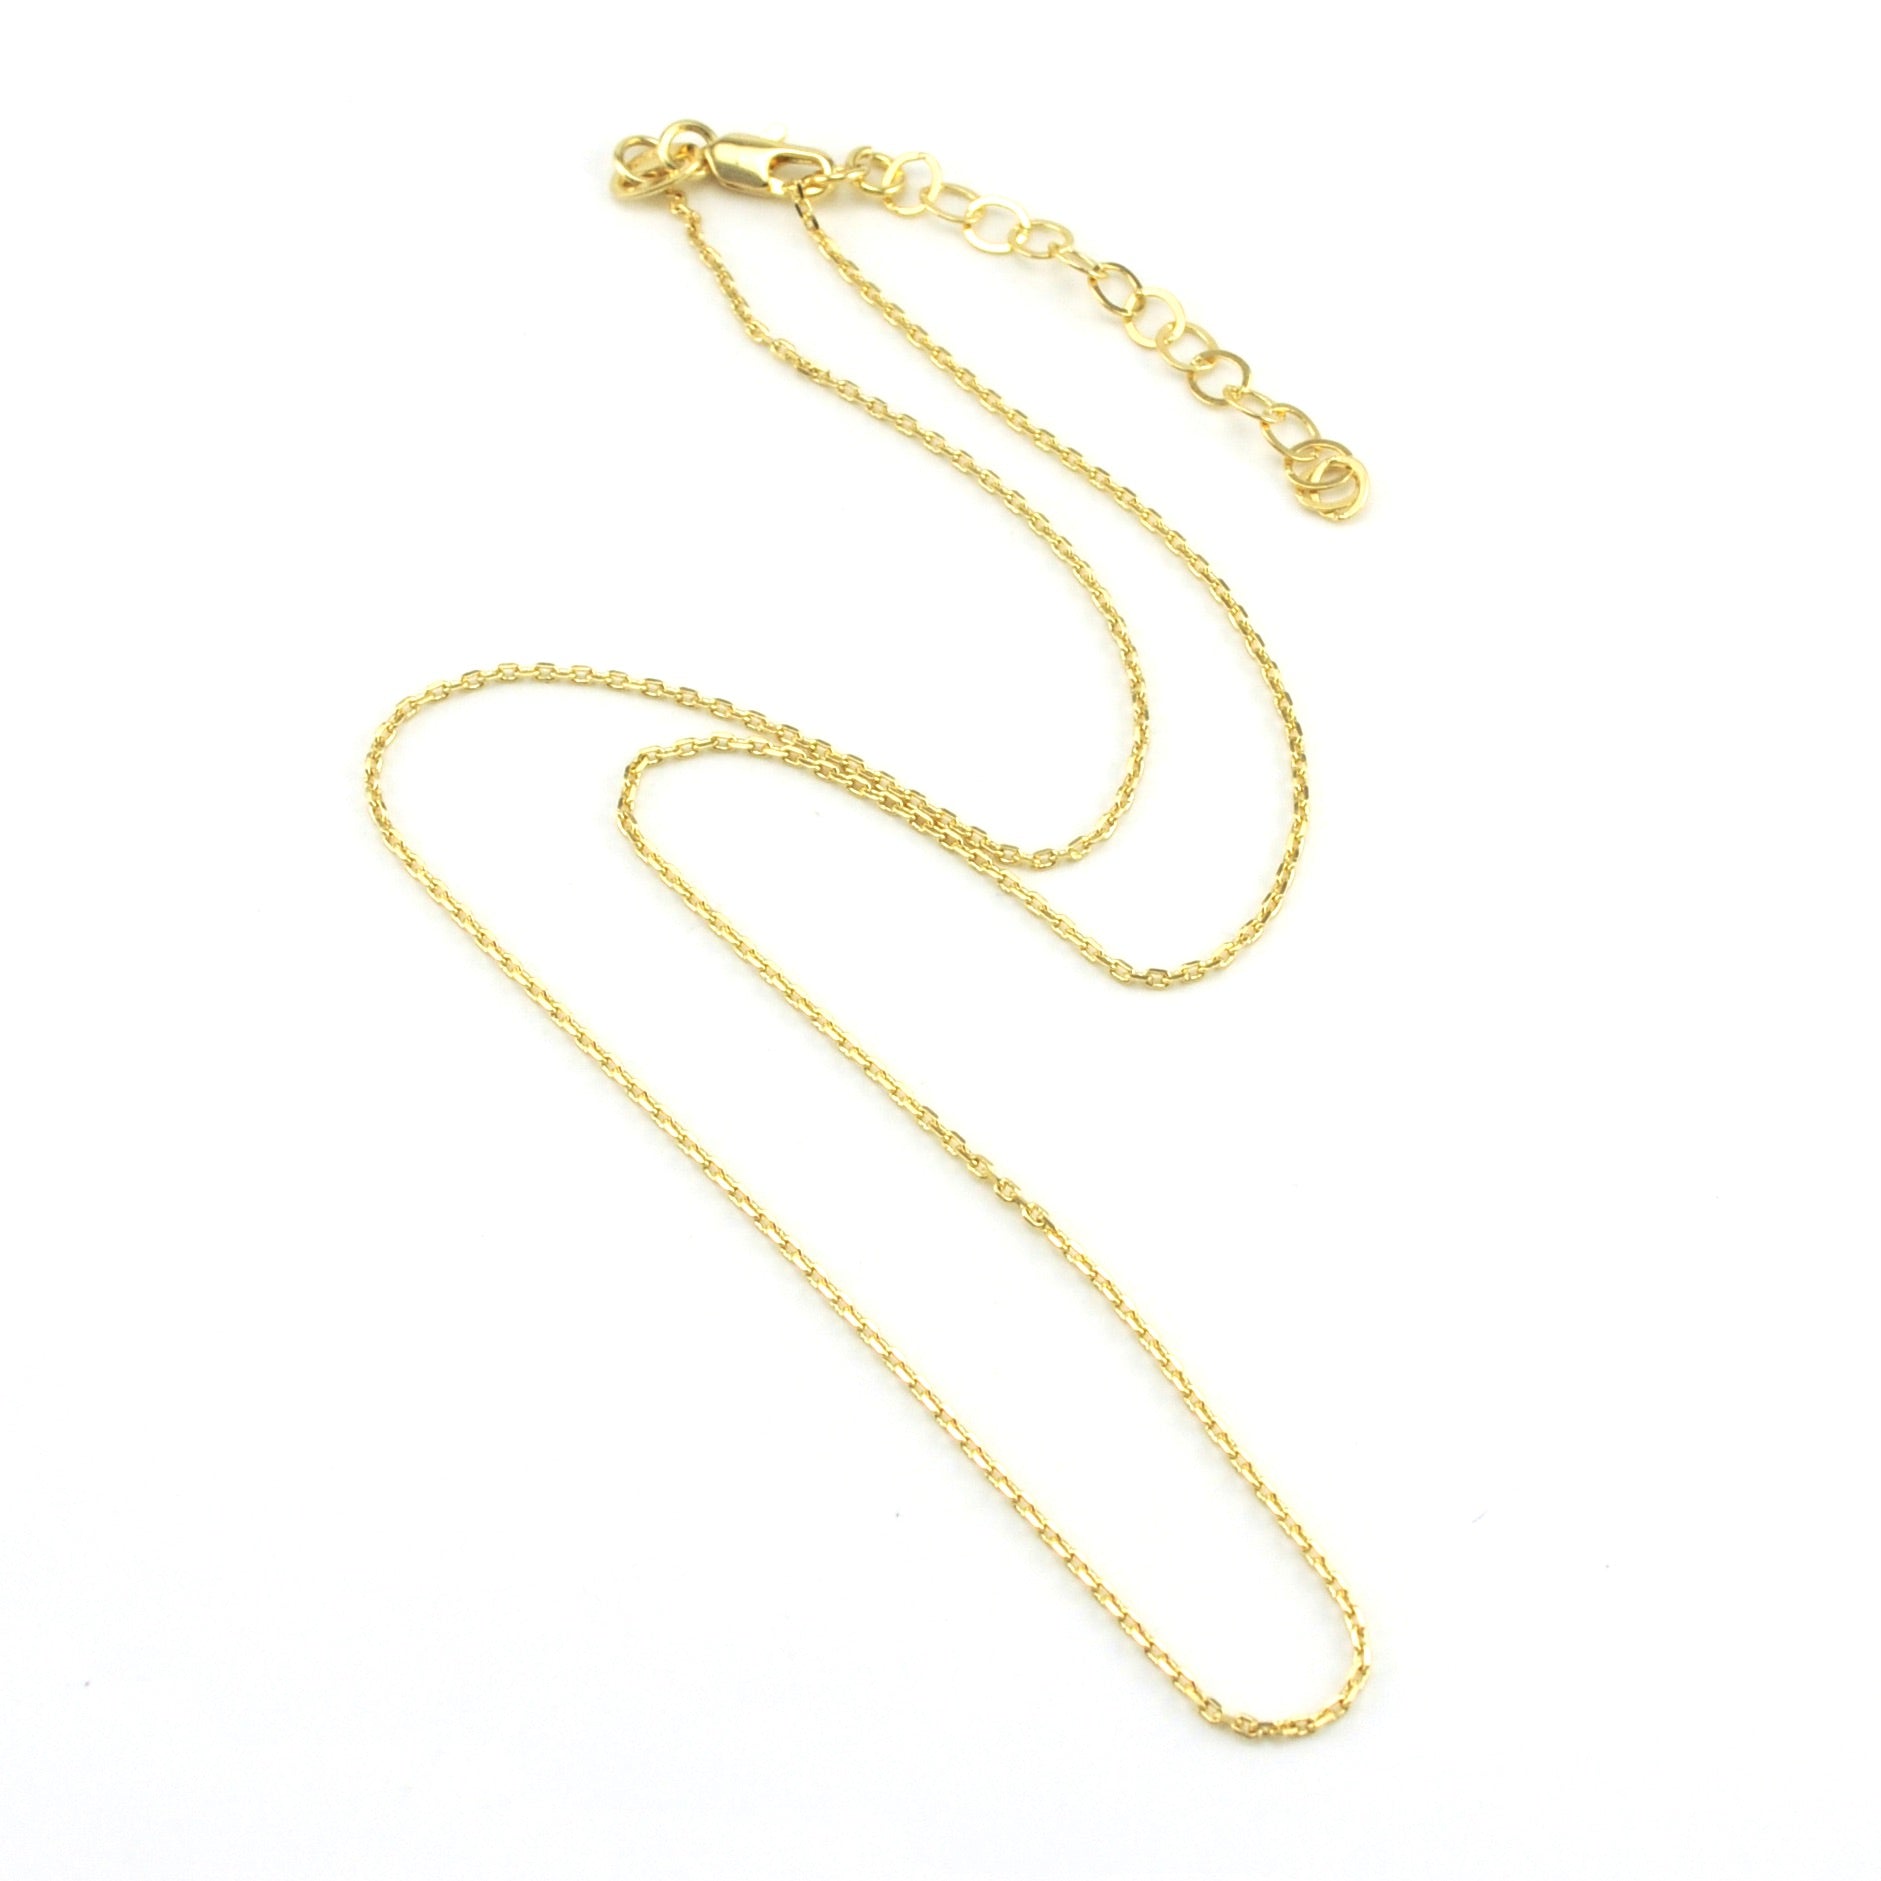 18k Gold Fill 16 Inch Diamond Cut Cable .9mm Chain with Extender